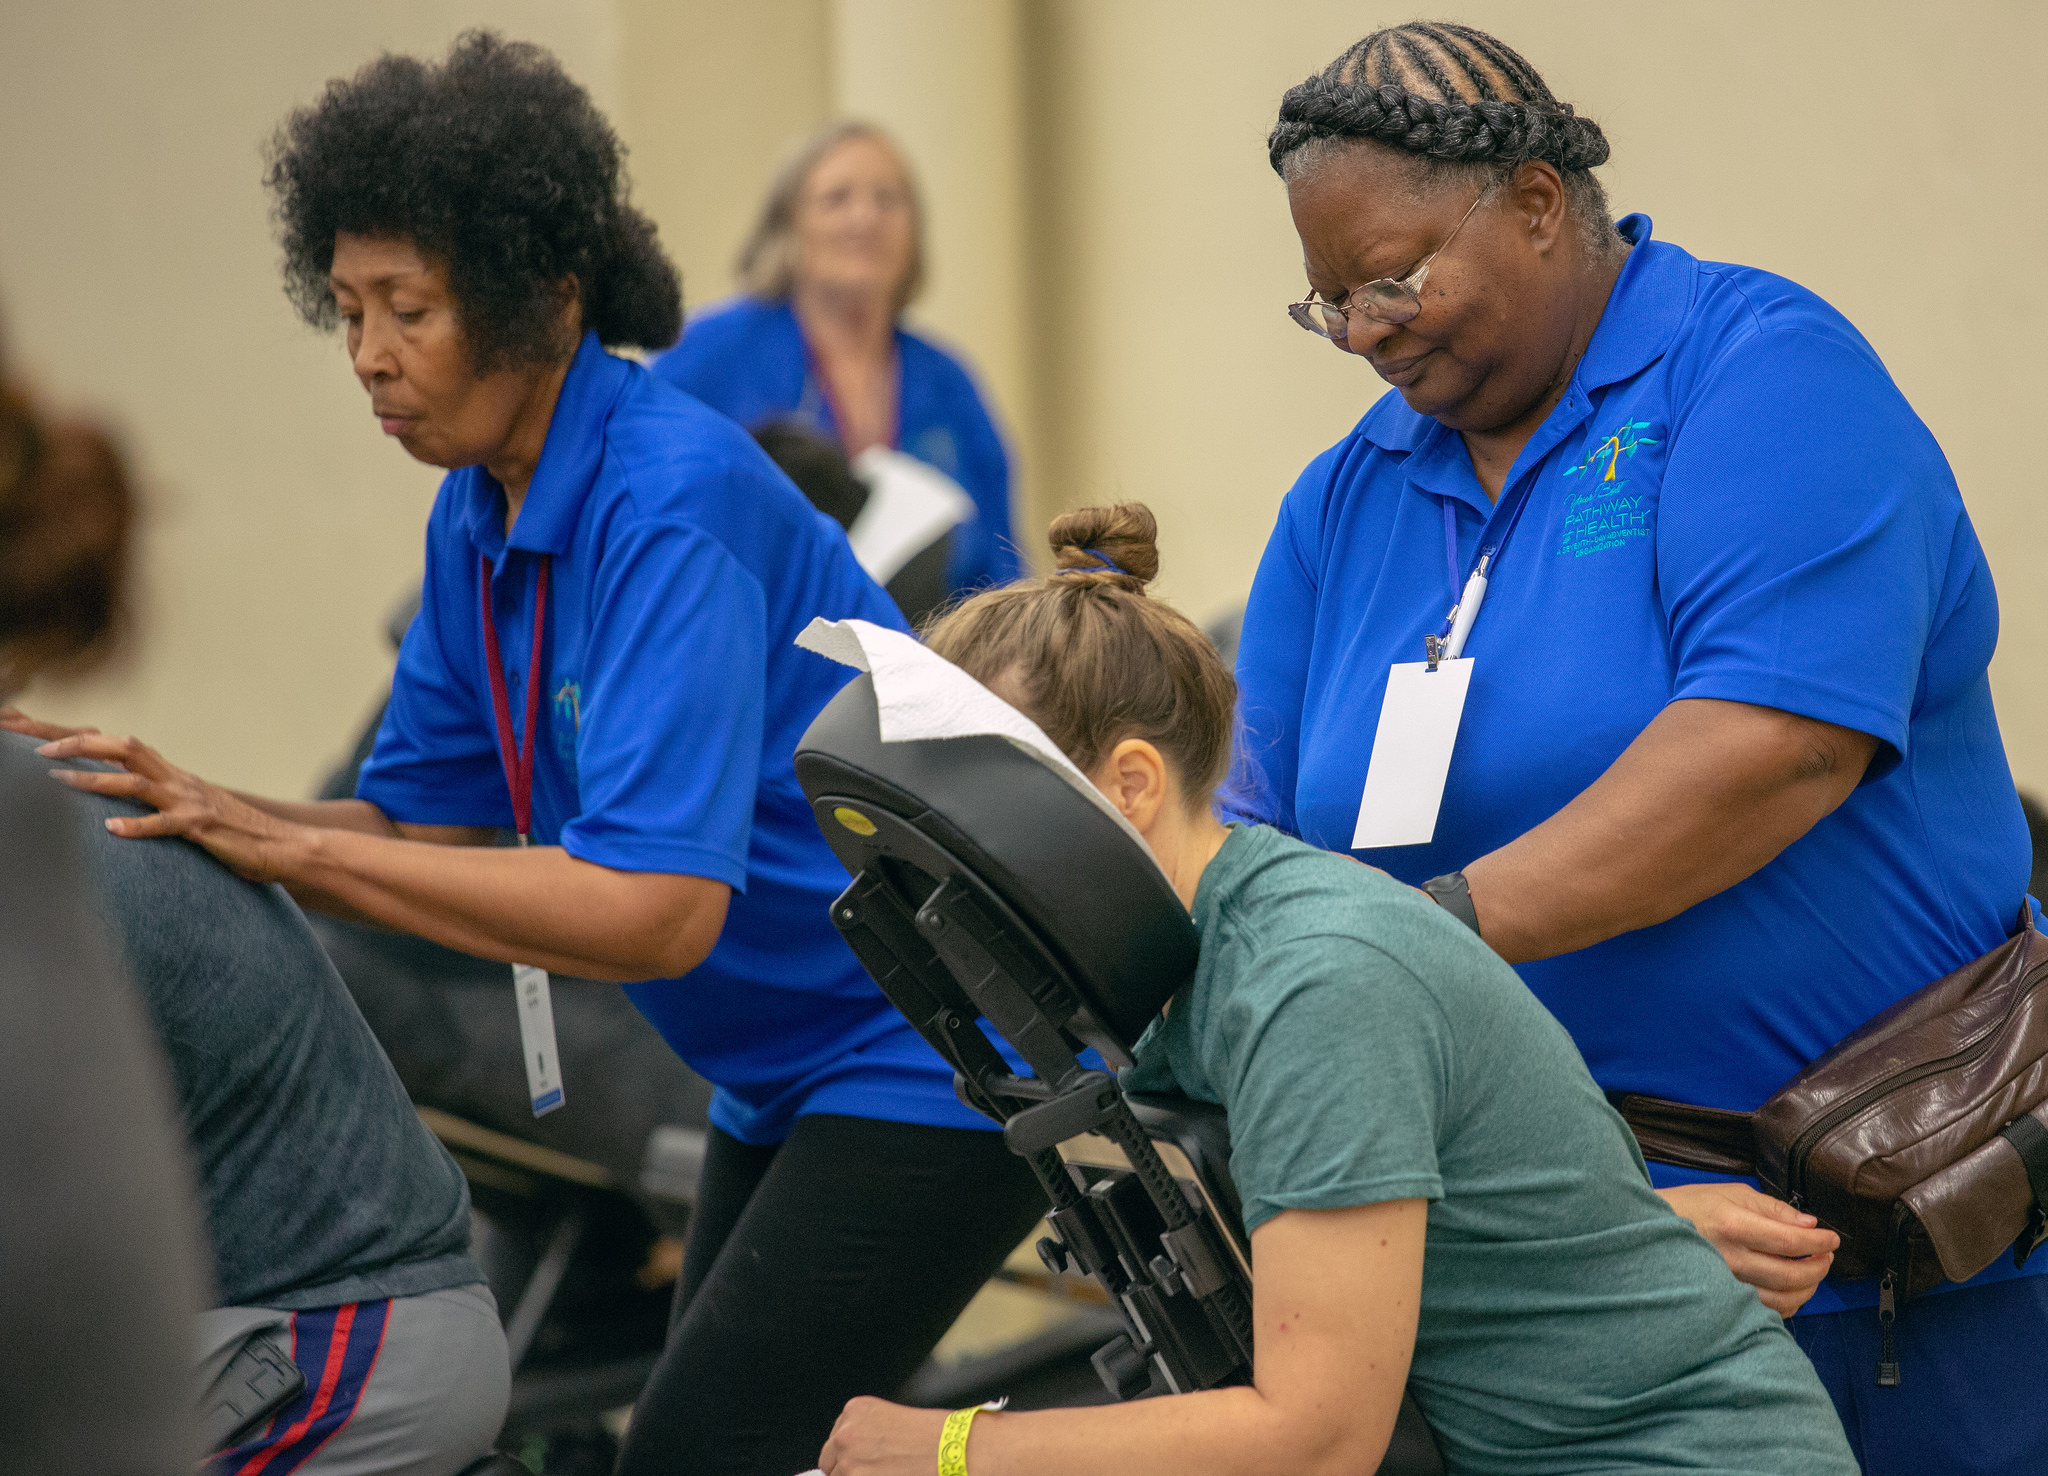 Pathway to Health Fort Worth clinic 2018 massage station